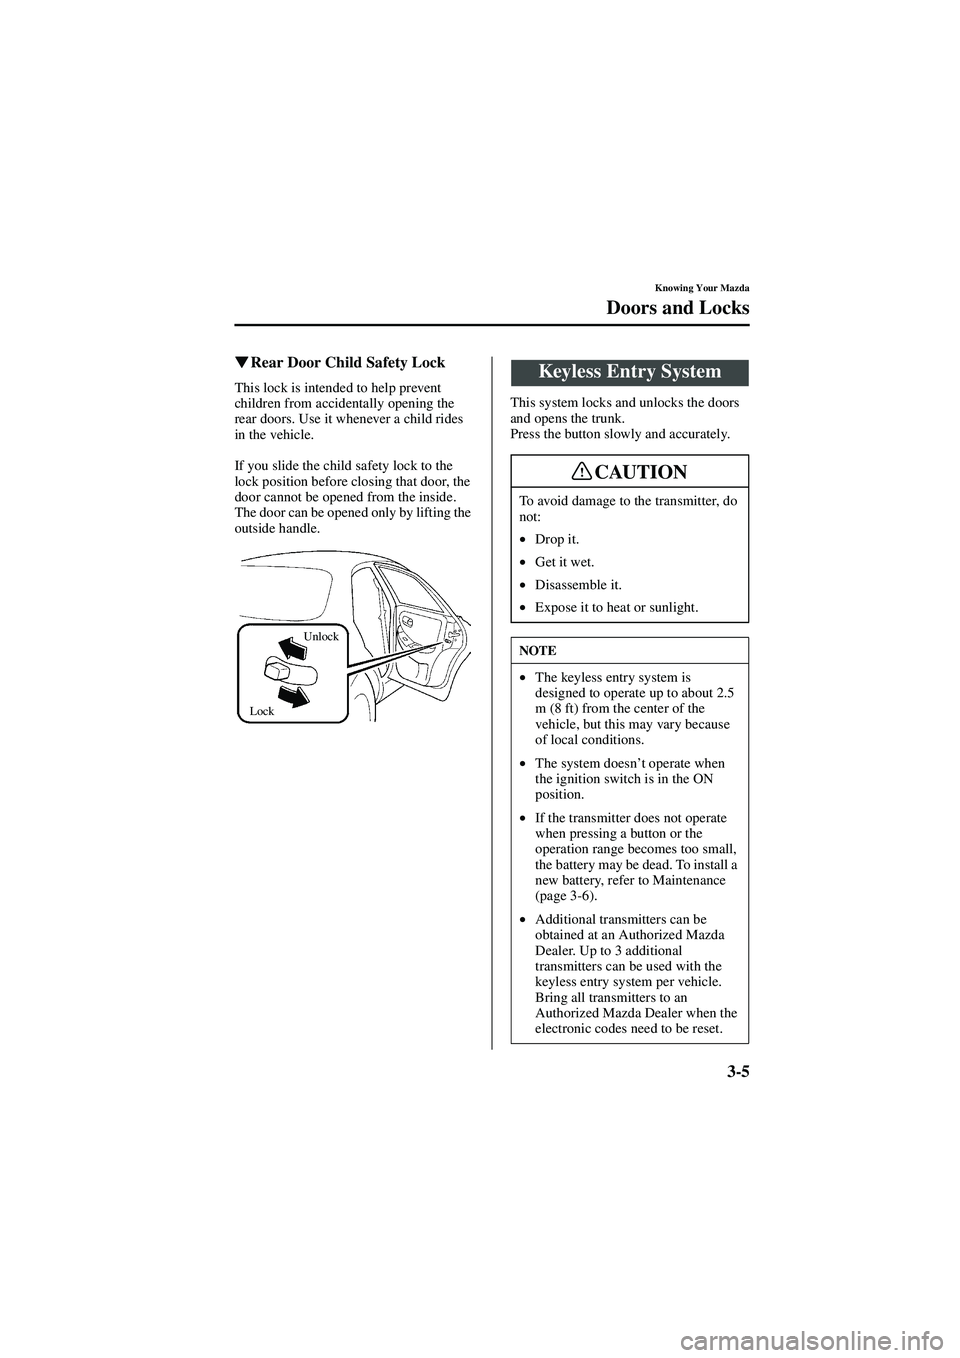 MAZDA MODEL 626 2002  Owners Manual 3-5
Knowing Your Mazda
Doors and Locks
Form No. 8Q50-EA-01G

  Rear Door Child Safety Lock
This lock is intended to help prevent 
children from accidentally opening the 
rear doors. Use it wheneve